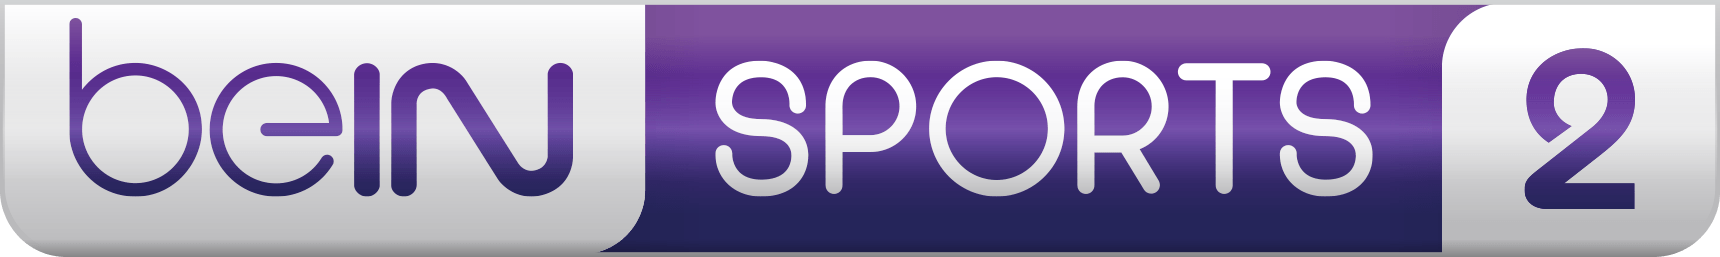 Bein Logo - File:Logo bein sports 2.png - Wikimedia Commons